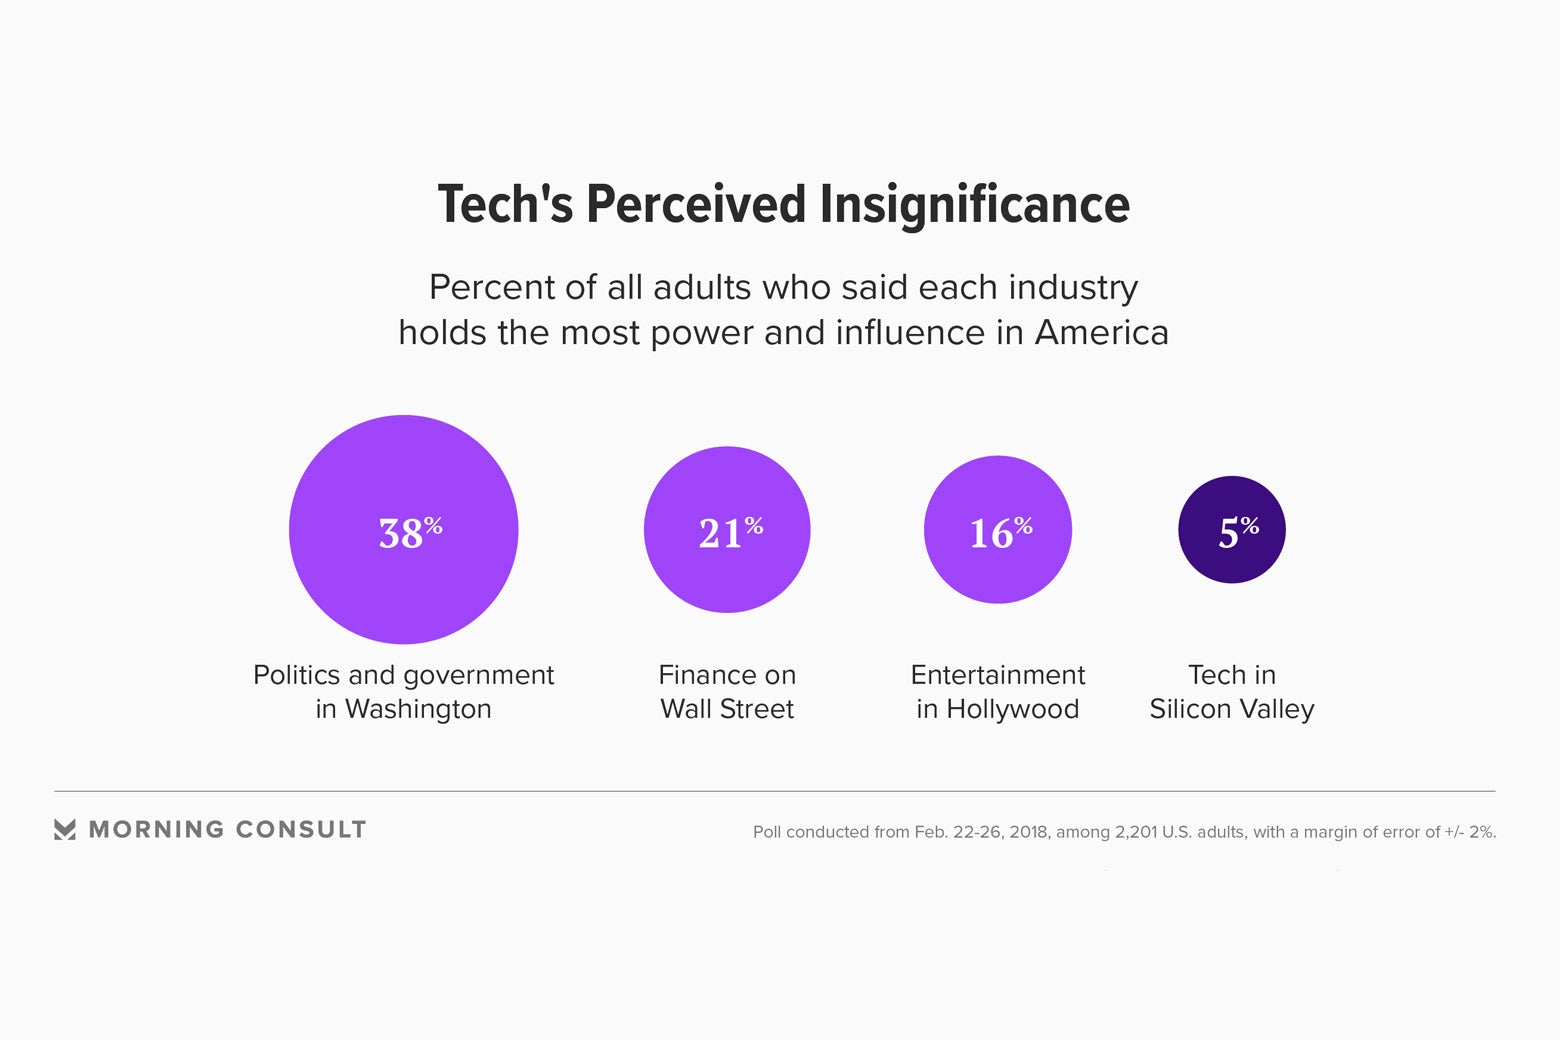 A Morning Consult survey shows that just 5 percent of respondents see the technology industry as America’s most influential.